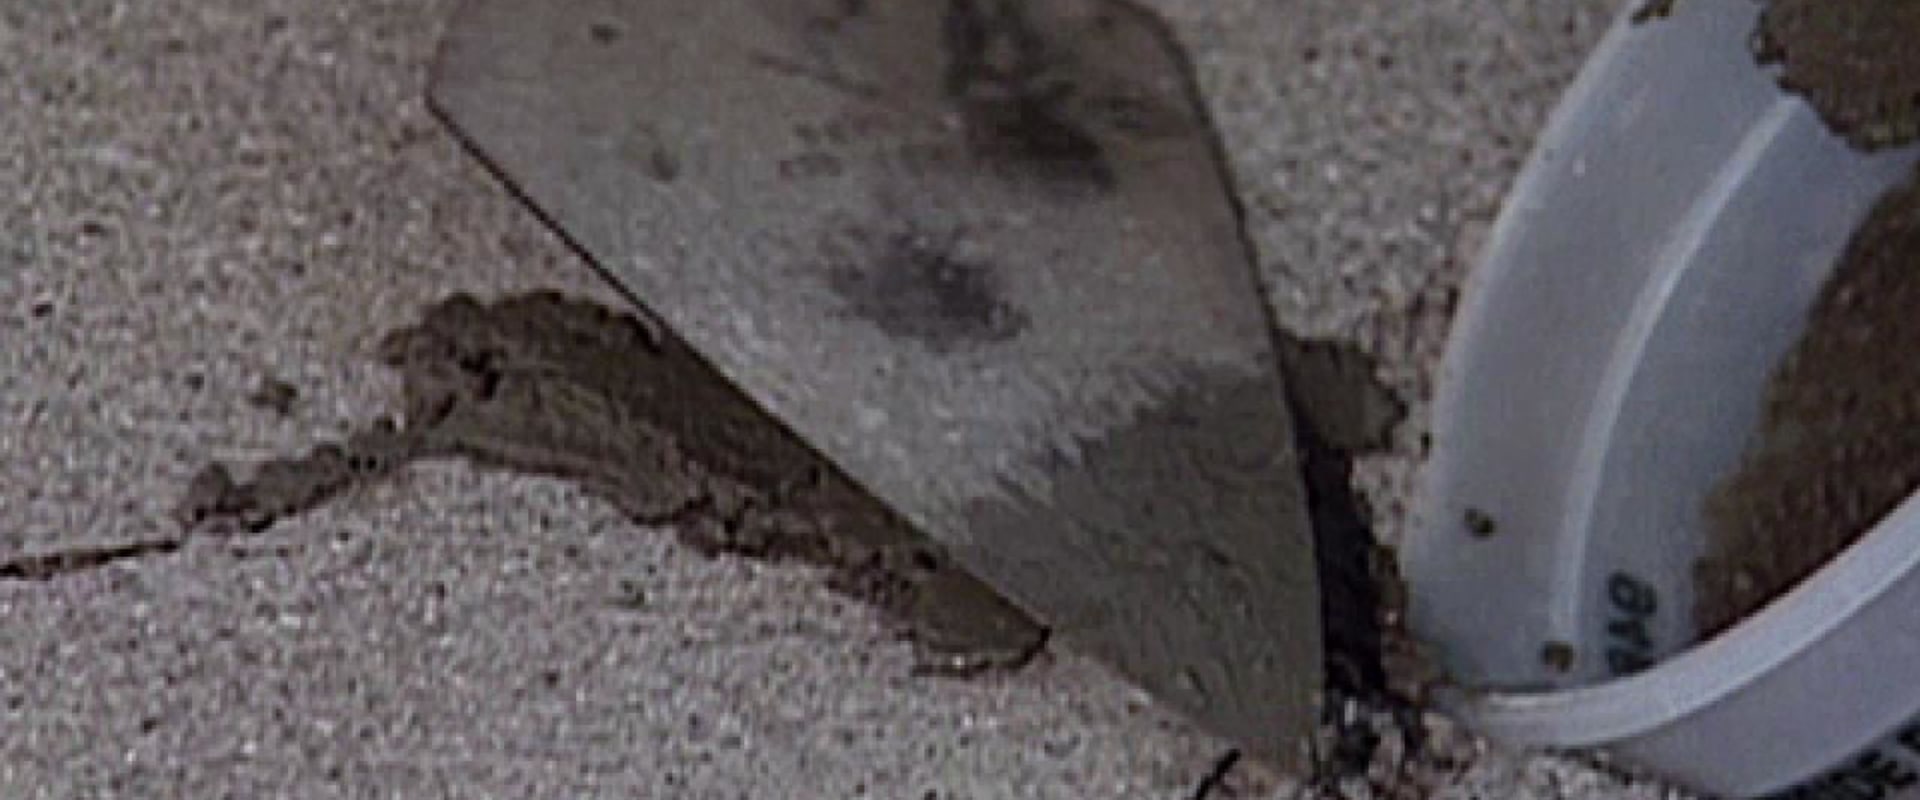 What is the best material for patching concrete?